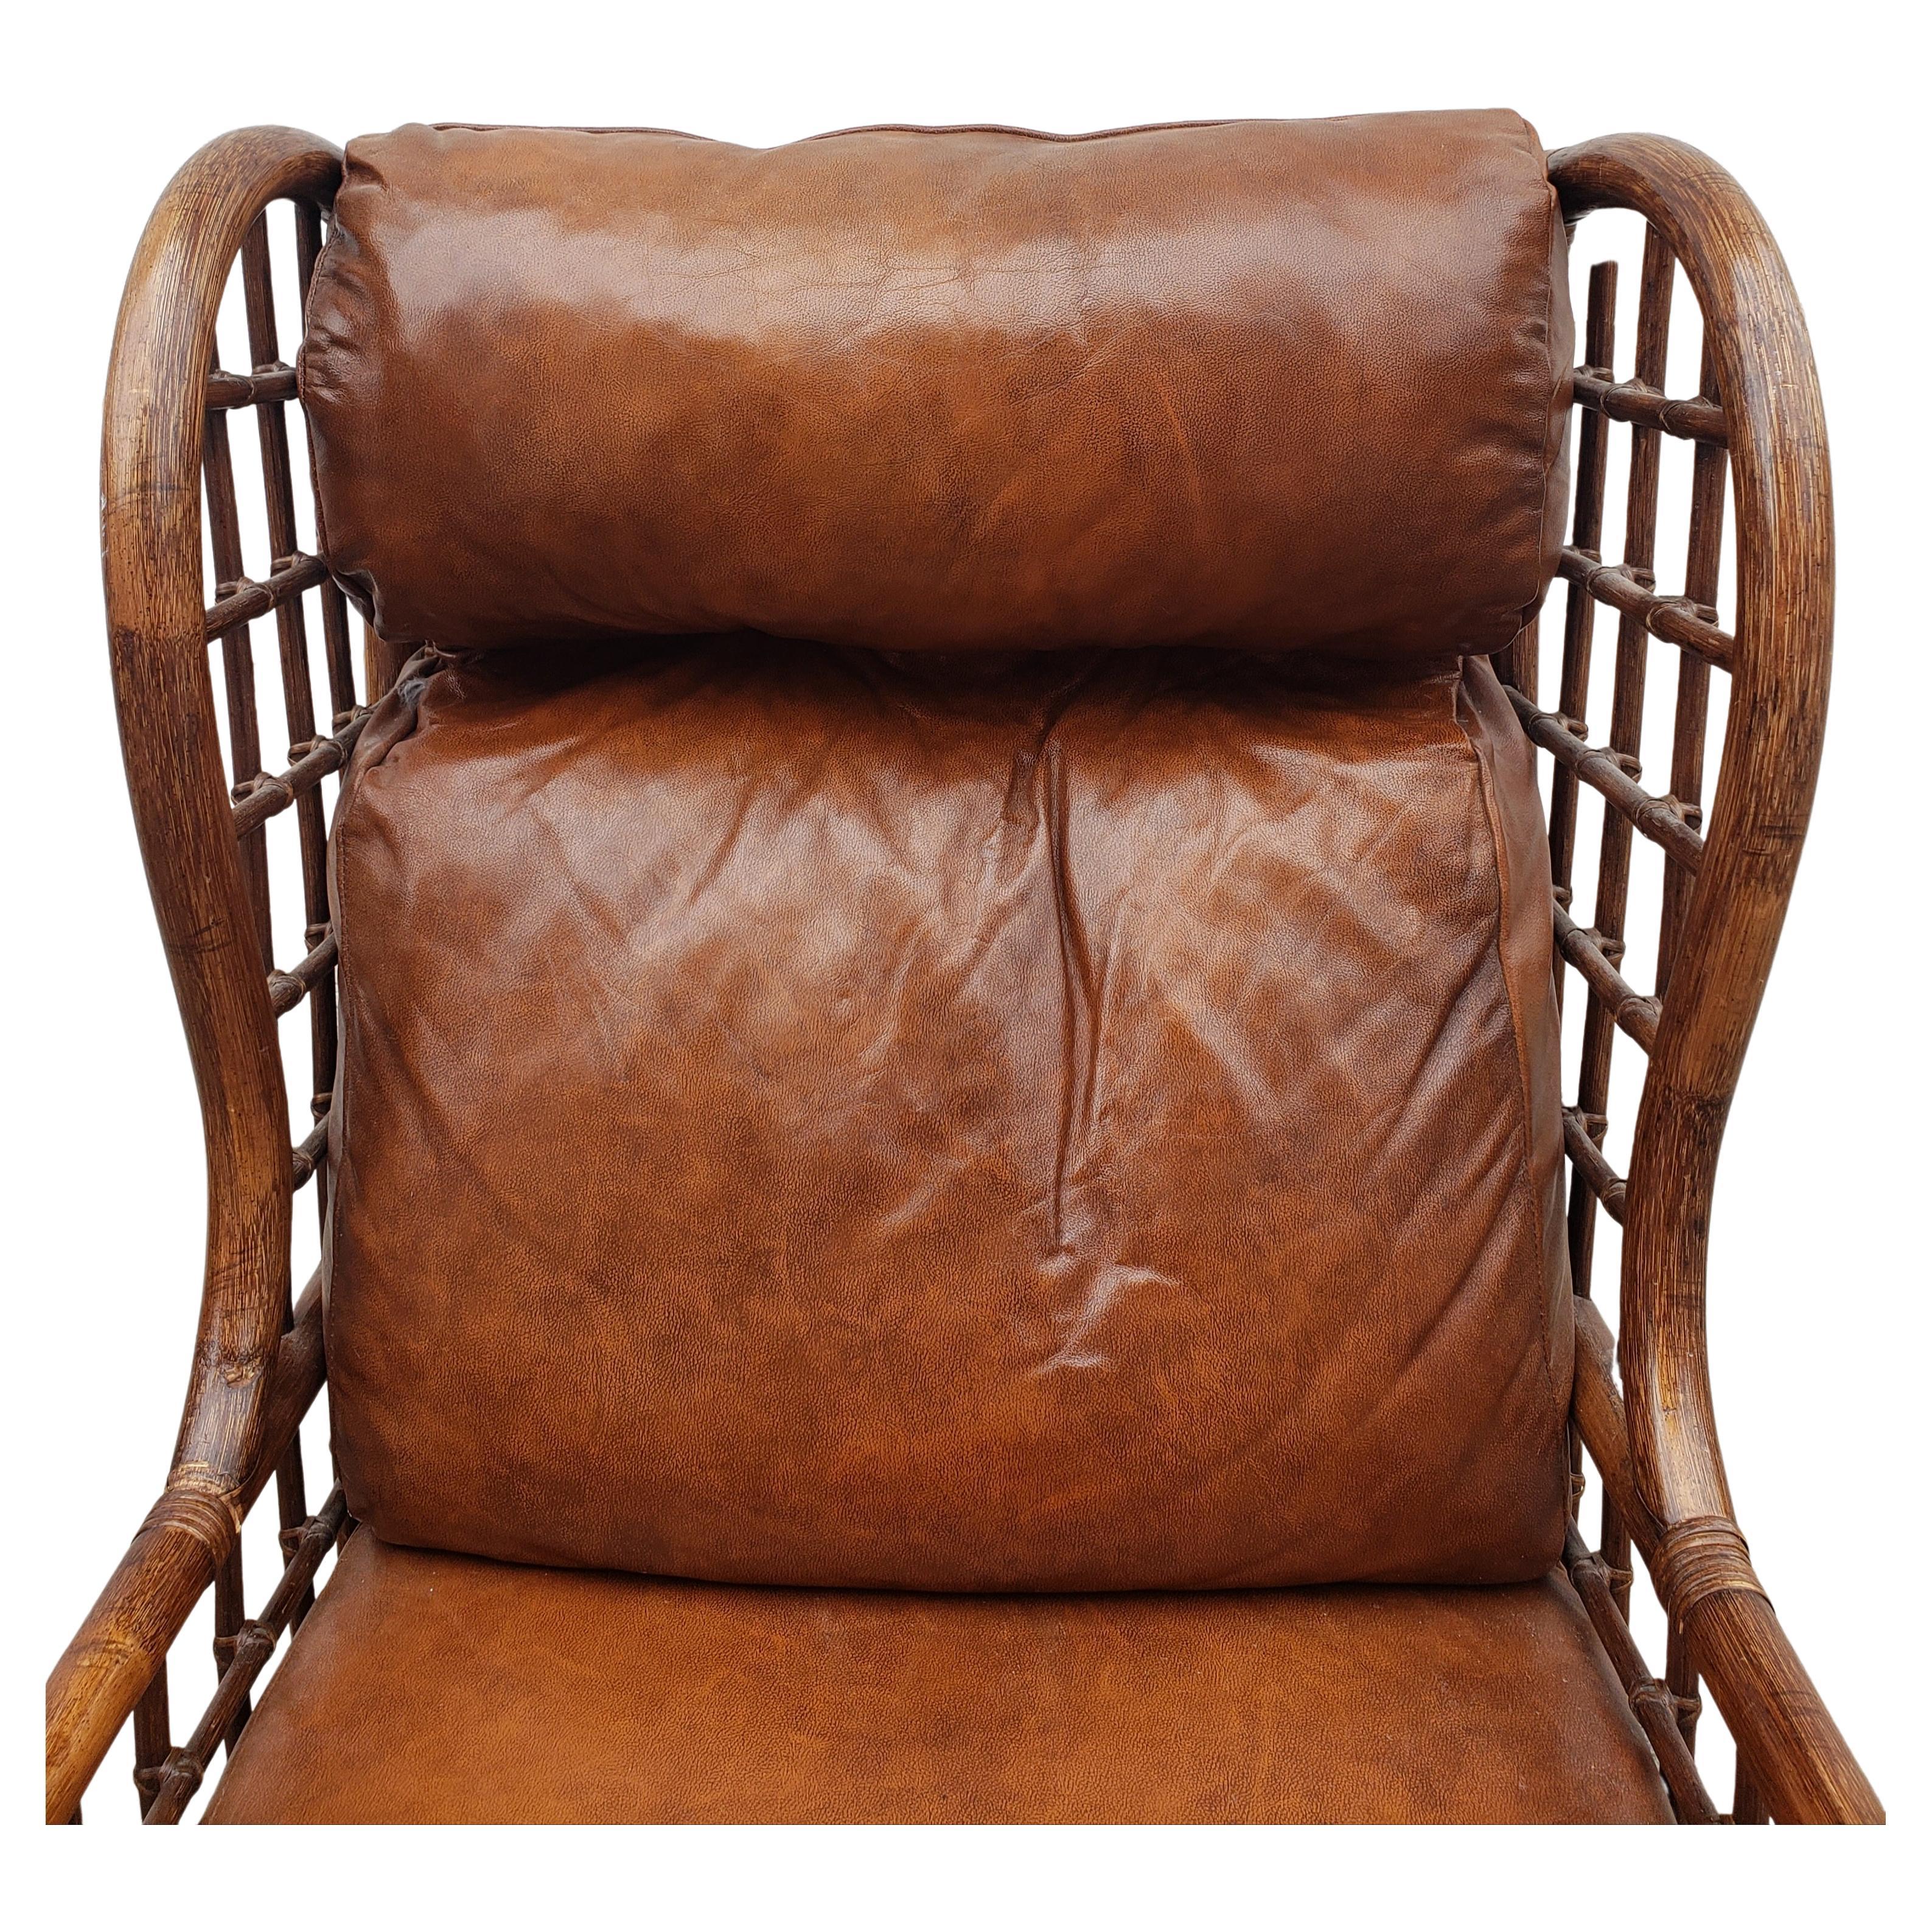 Combining relaxed materials and luxurious comfort, this vintage Alexvale Chair represents unbuttoned island elegance. The webbed rattan and wicker body, bent rattan frame and leather loose leather cushions create a lightweight look from any angle,